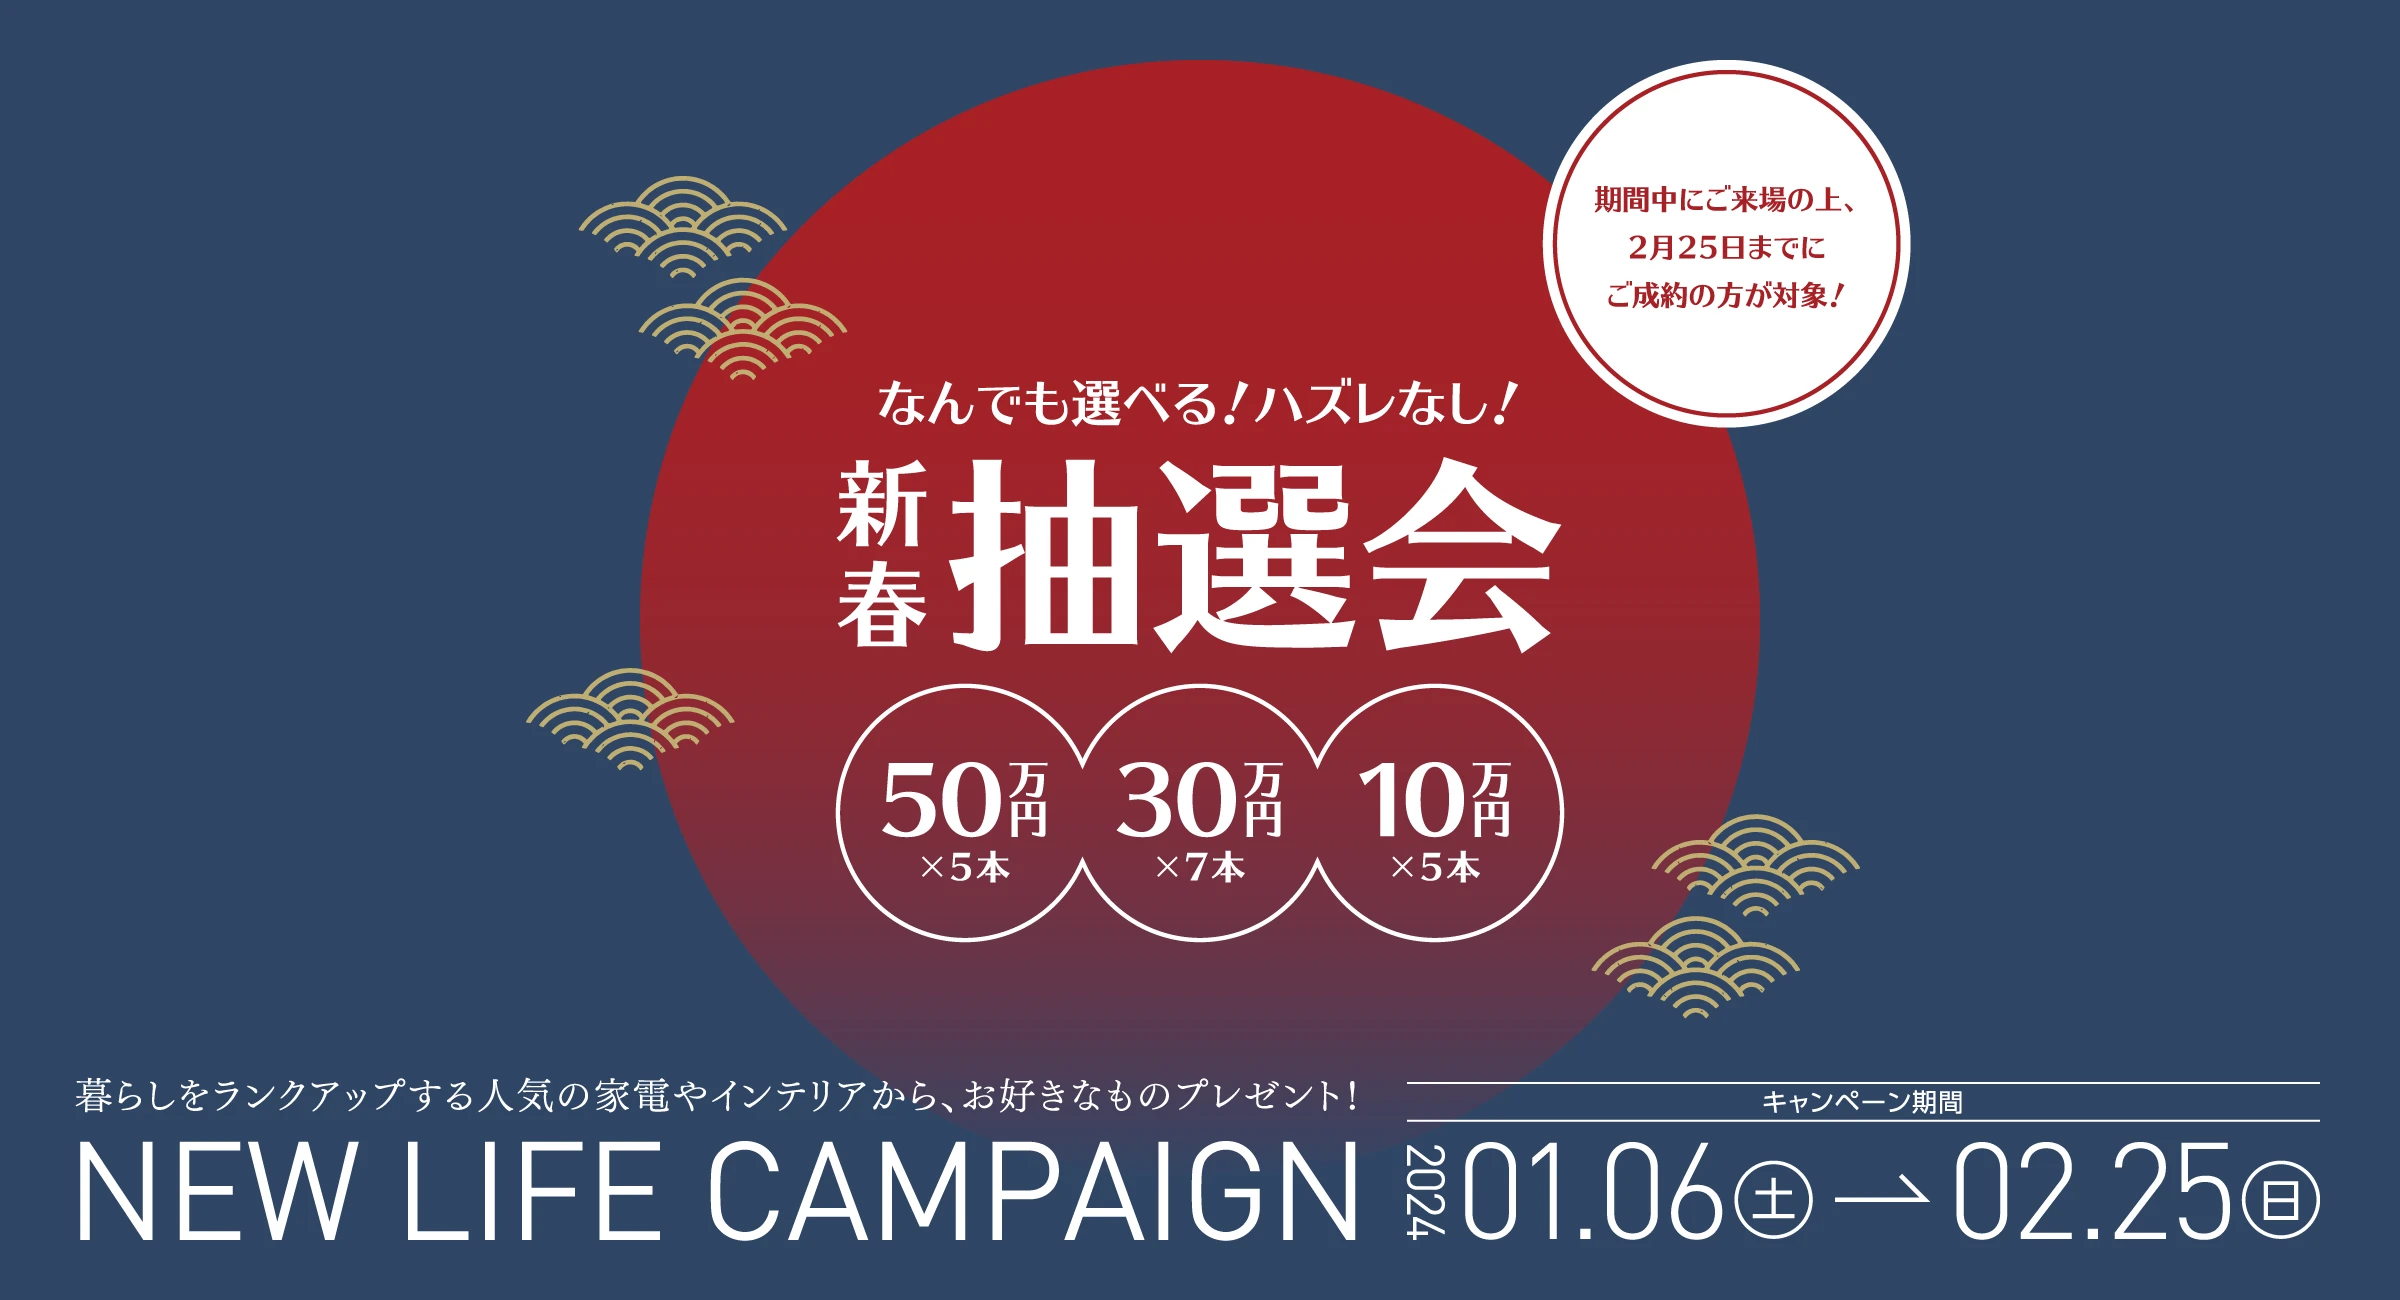 NEW LIFE CAMPAIGN